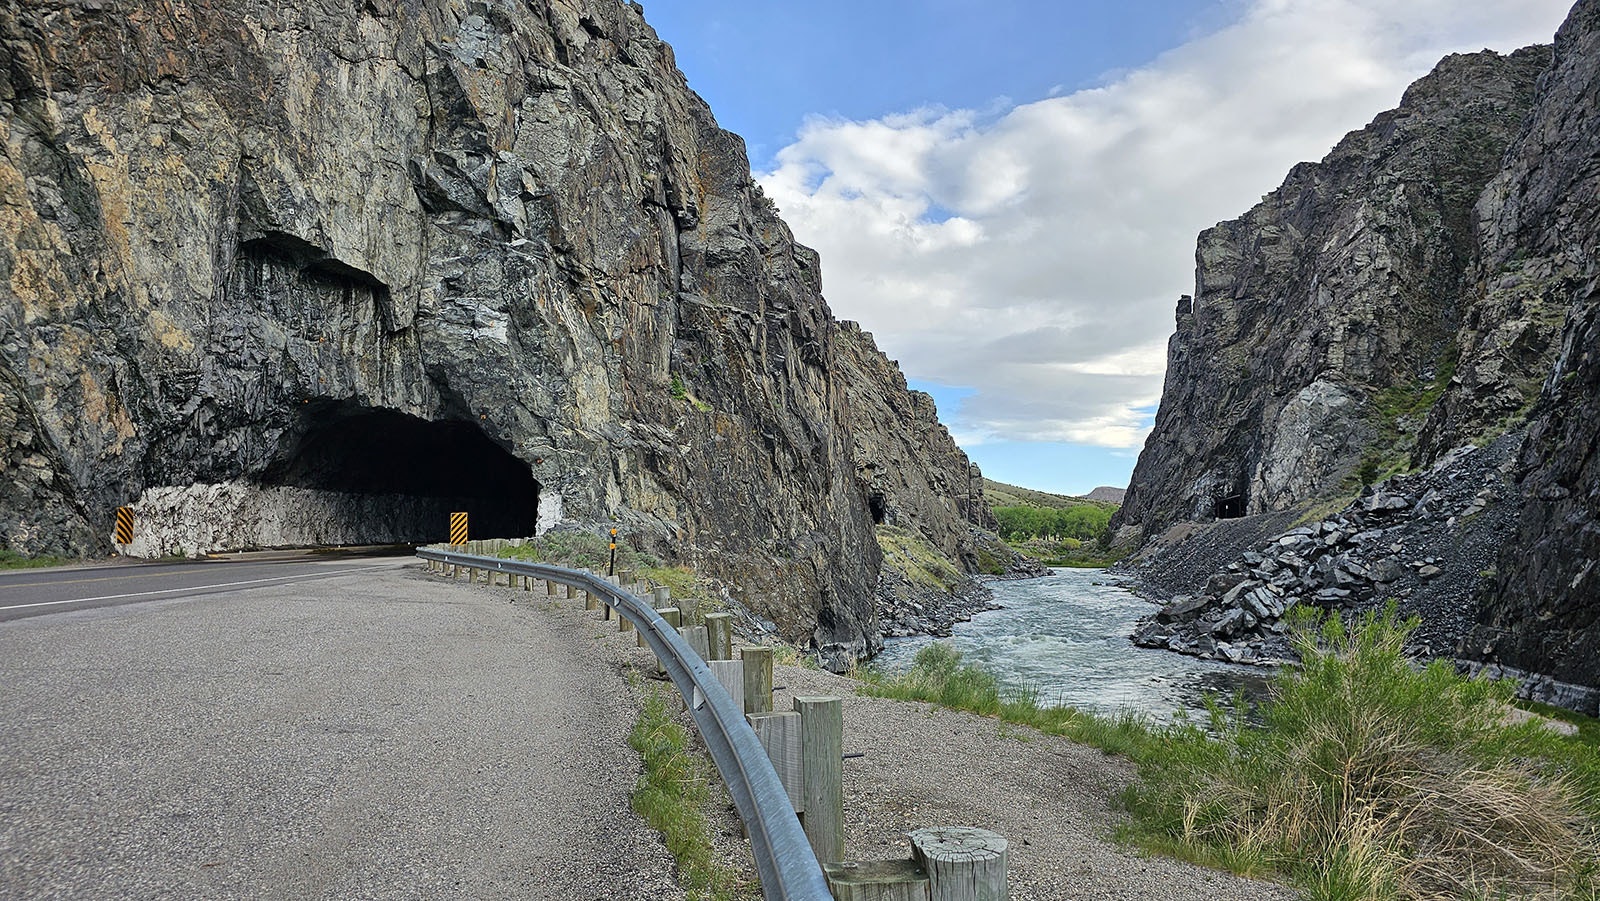 The tunnels in the Wind River Canyon's scenic byway.